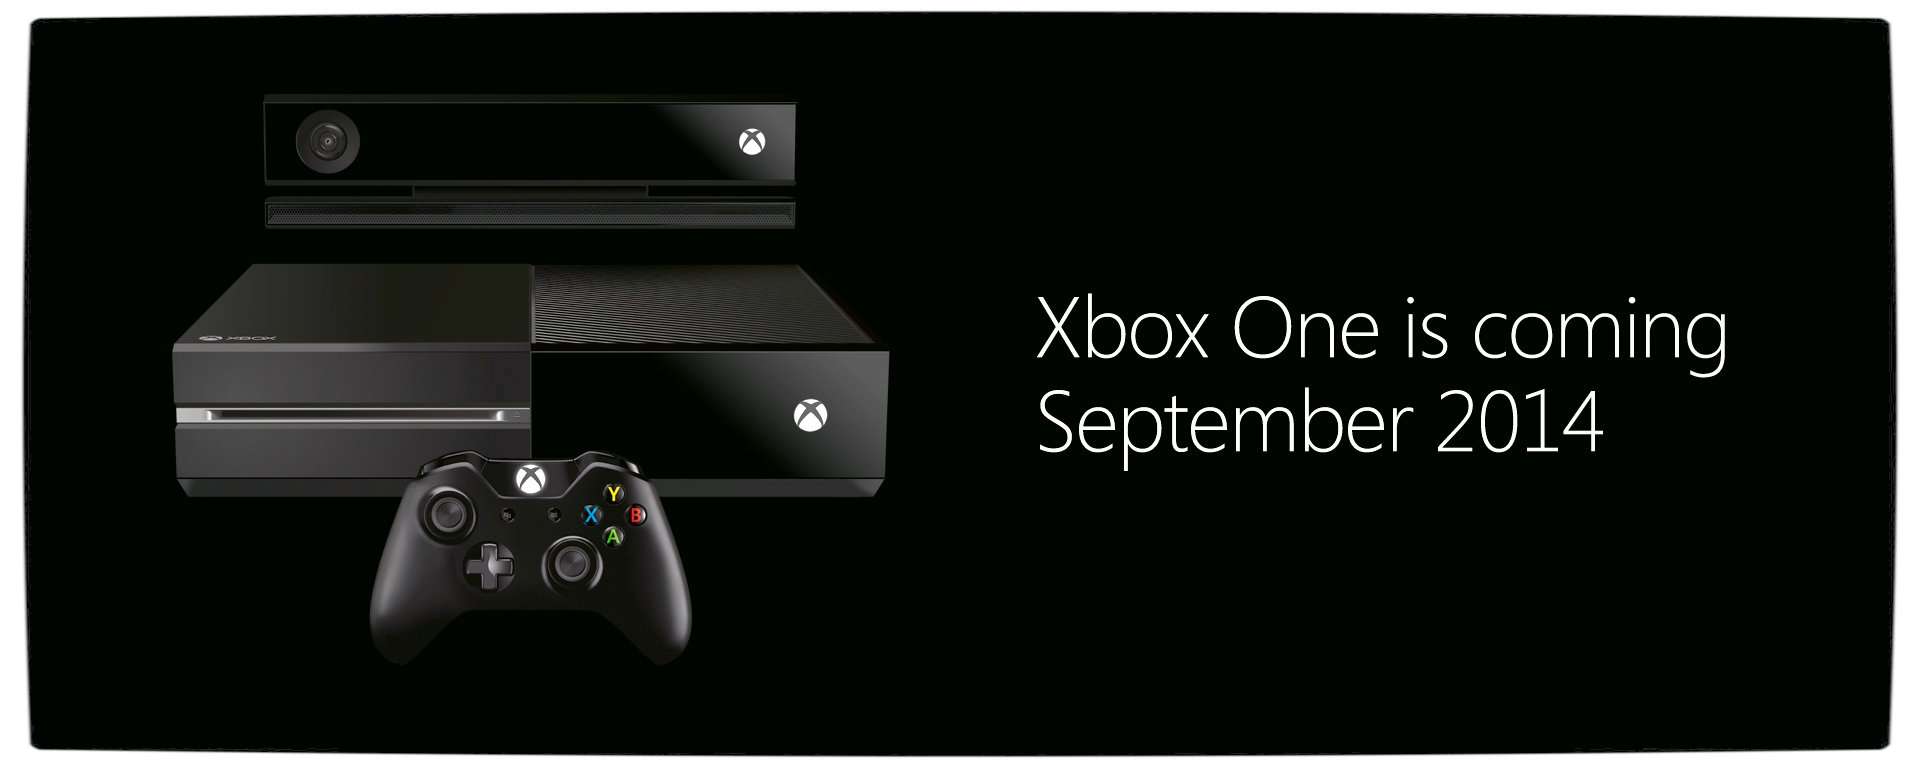 Vamers - FYI - Gaming - Microsoft's Xbox One is coming to South Africa in September - Inline Banner